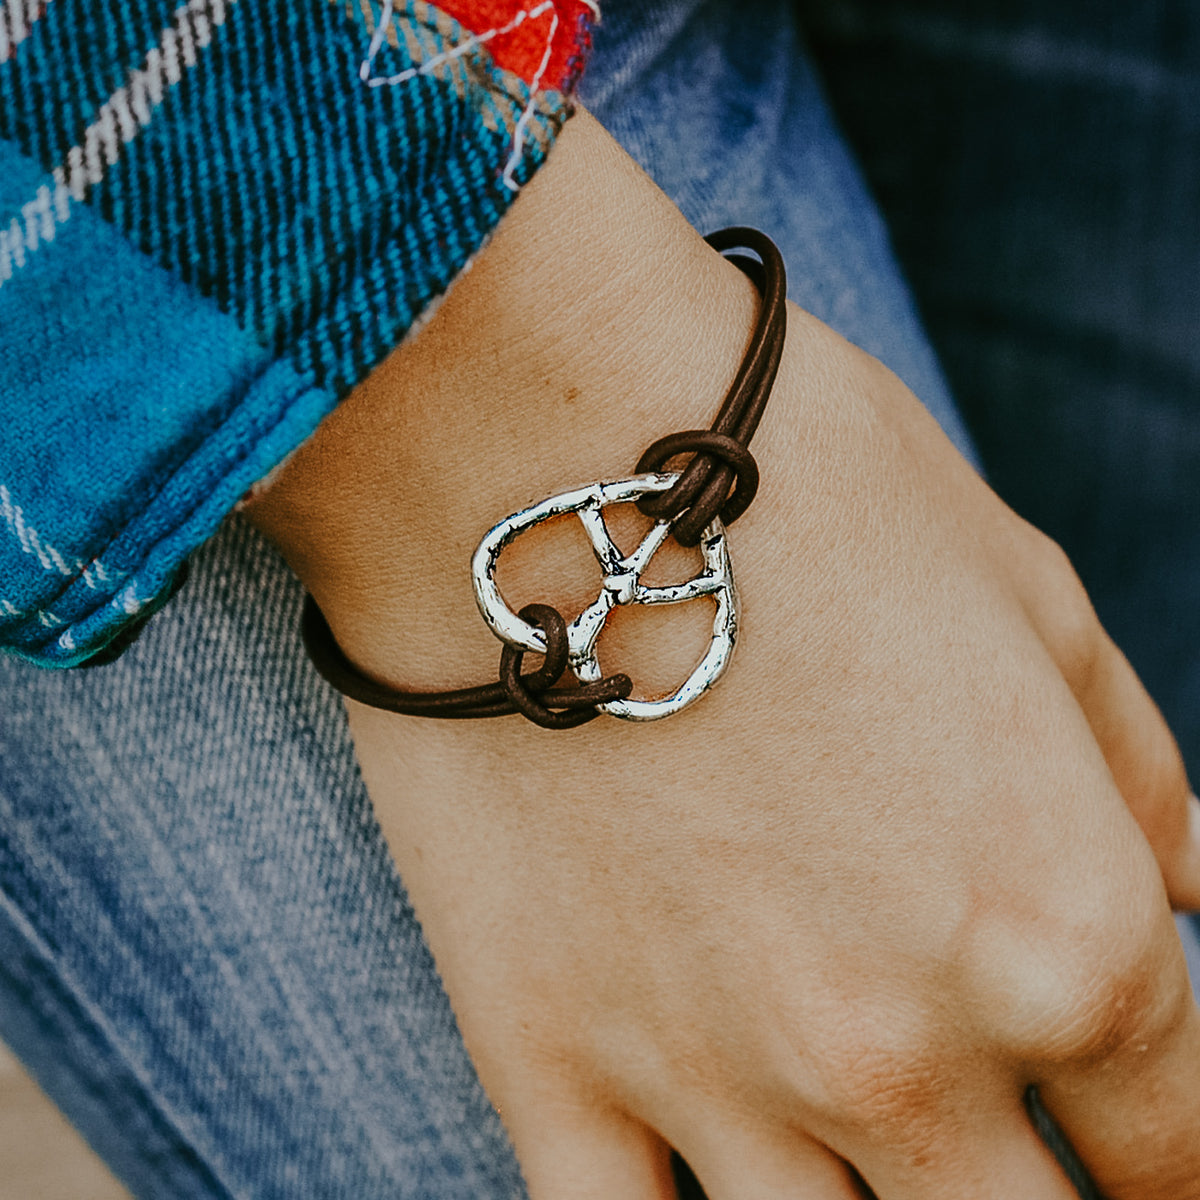 leather bracelet with heart peace sign